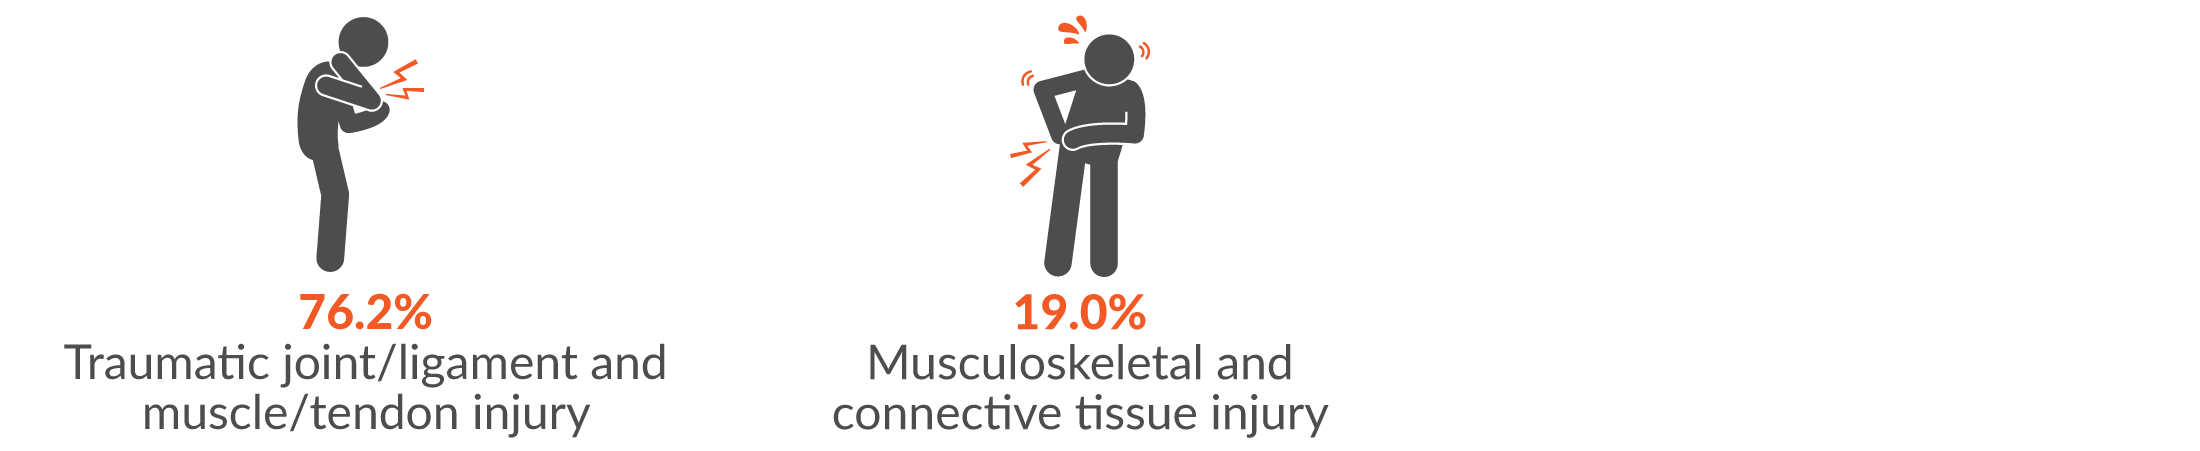 76.2% traumatic joint/ligament and muscle/tendon injury; and 19.0% Musculoskeletal and connective tissue injury.